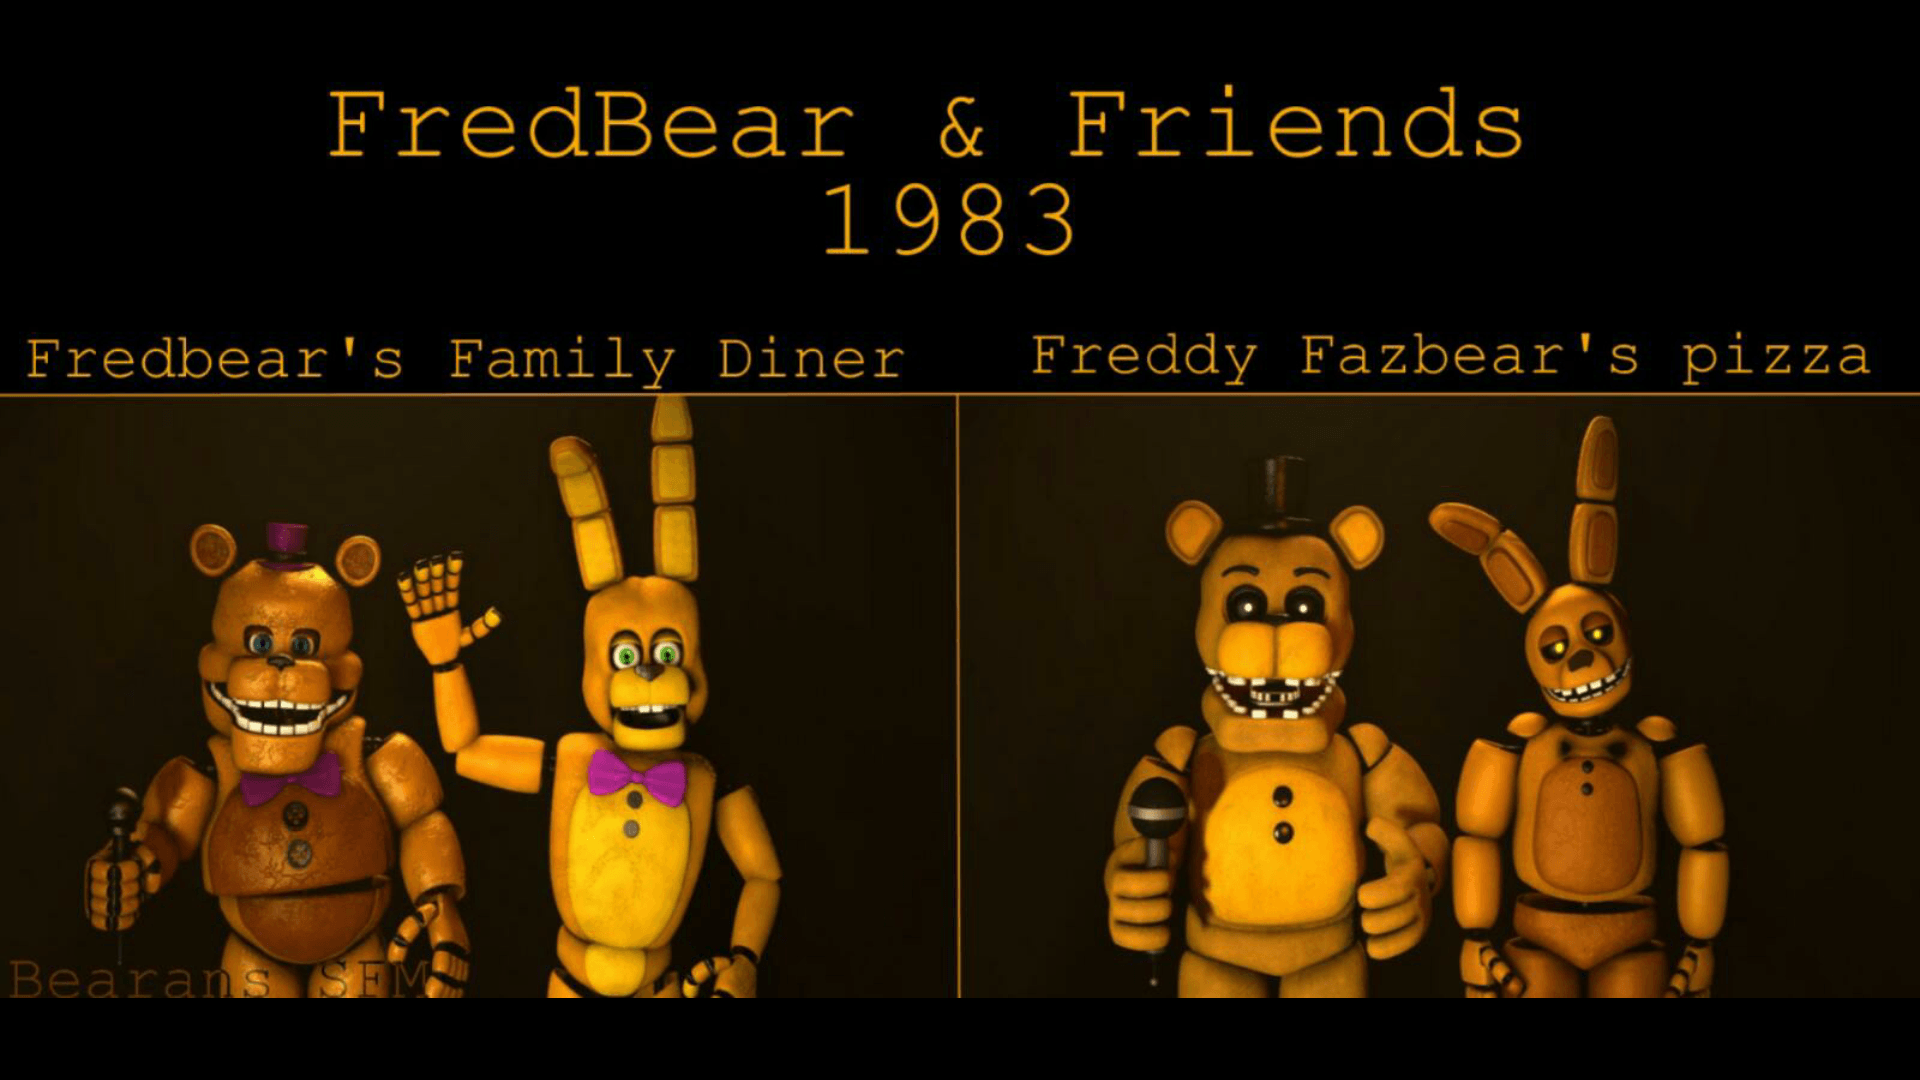 My thoughts on Fredbear and Springbonnie